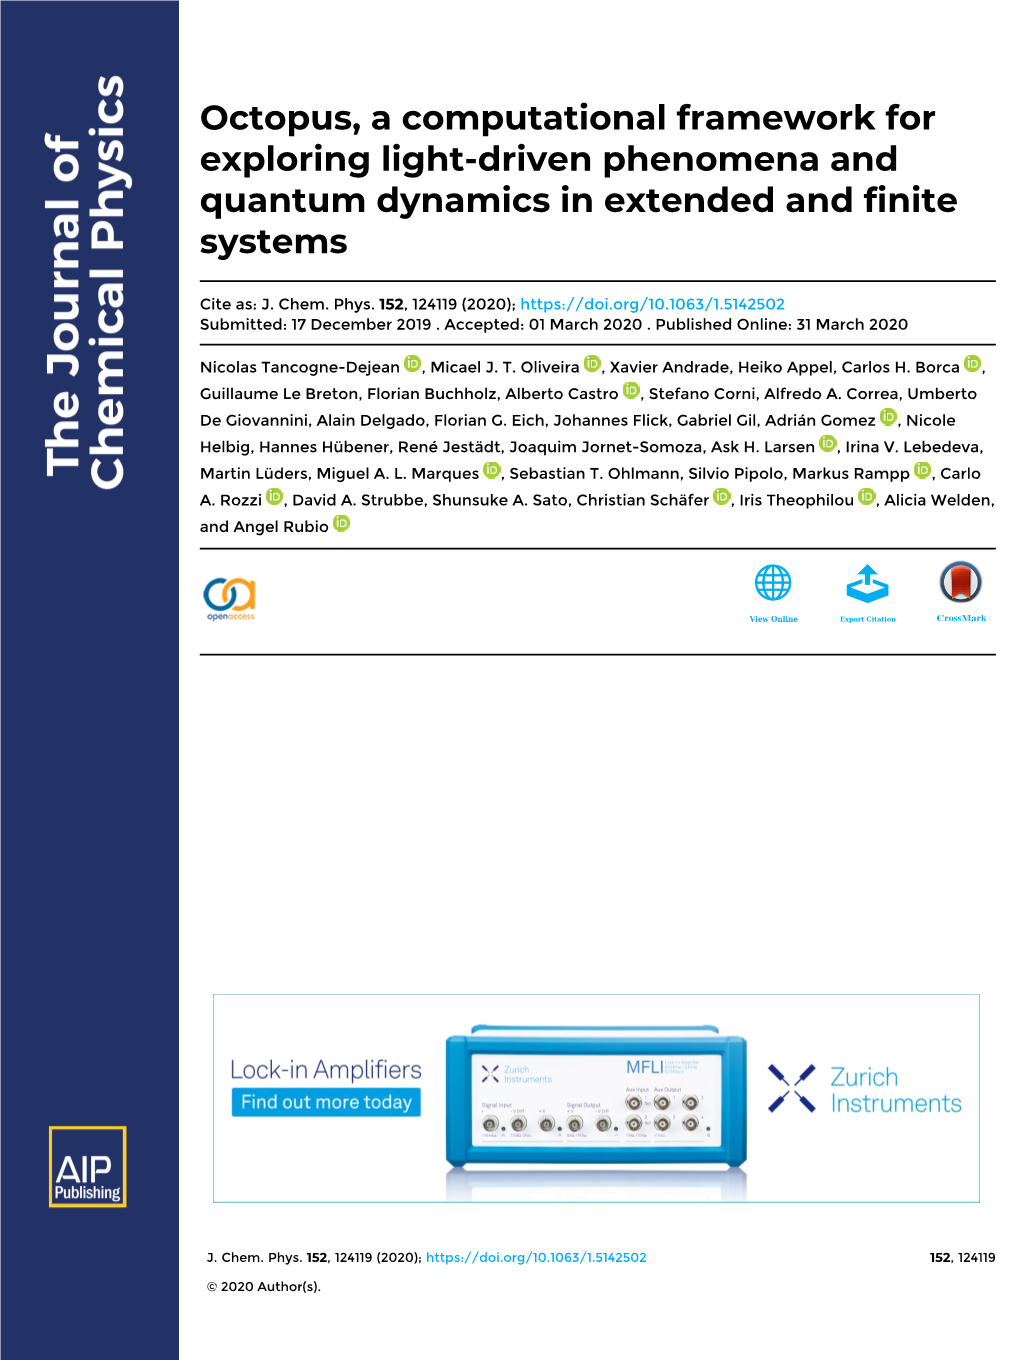 Octopus, a Computational Framework for Exploring Light-Driven Phenomena and Quantum Dynamics in Extended and Finite Systems